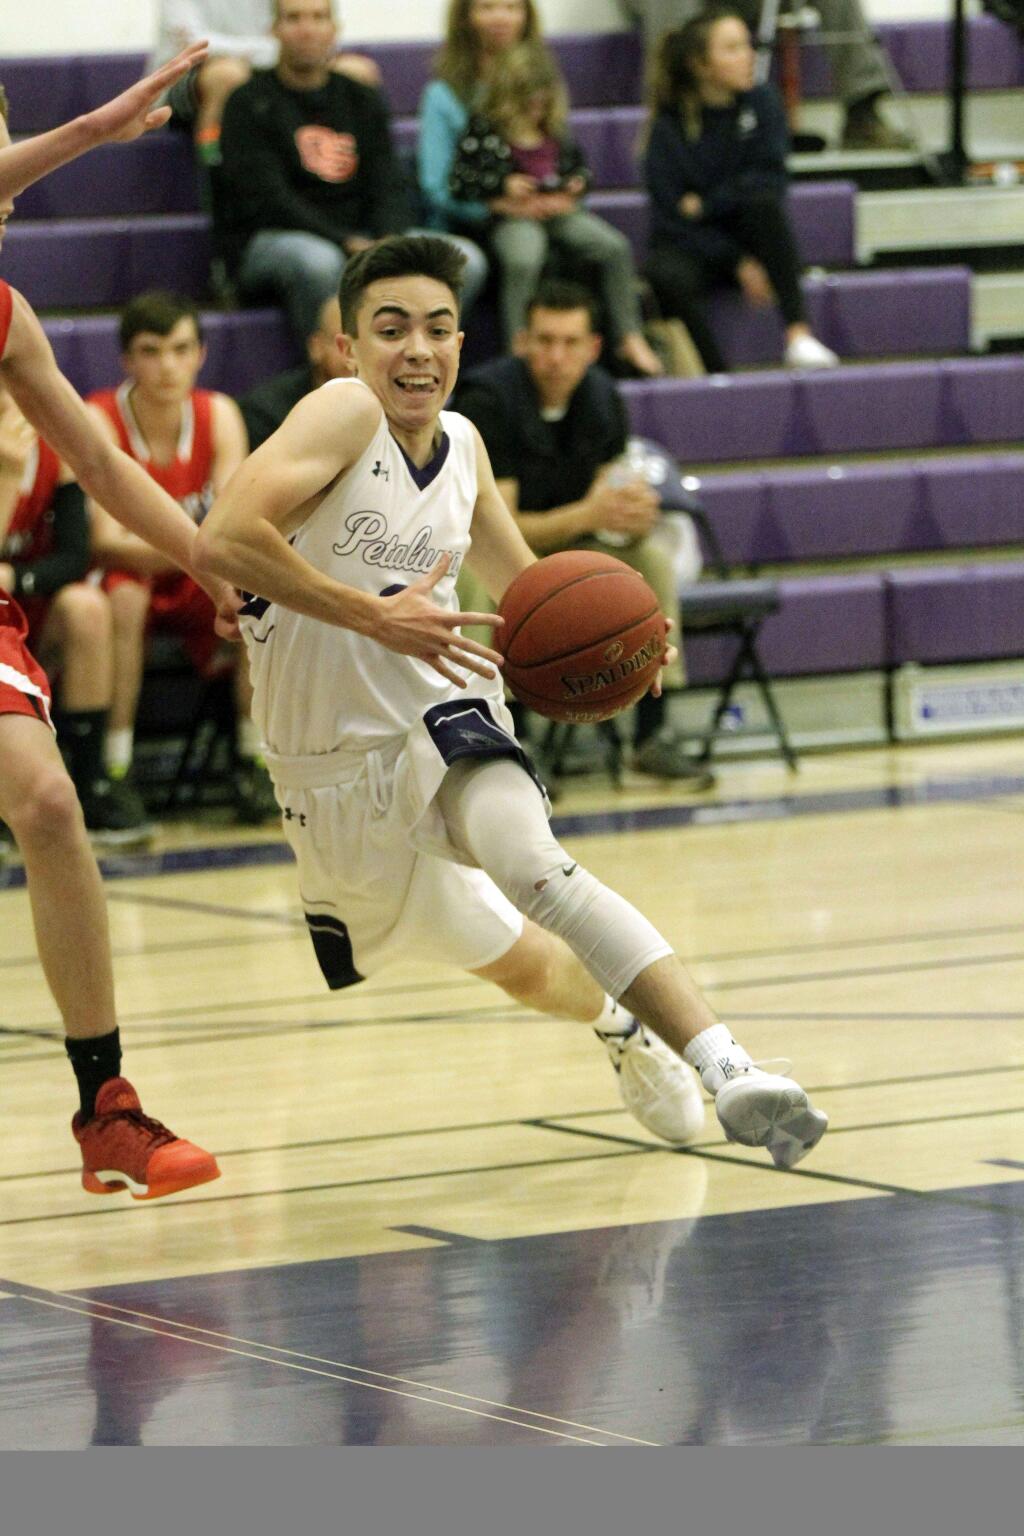 Petaluma's Robbie Isetta drives to the hoop. The 3-year varsity veteran returns to lead the Trojans into the VVAL. Isetta is now at Holy Cross College in Indiana. (DWIGHT SUGIOKA/FOR THE ARGUS-COURIER)